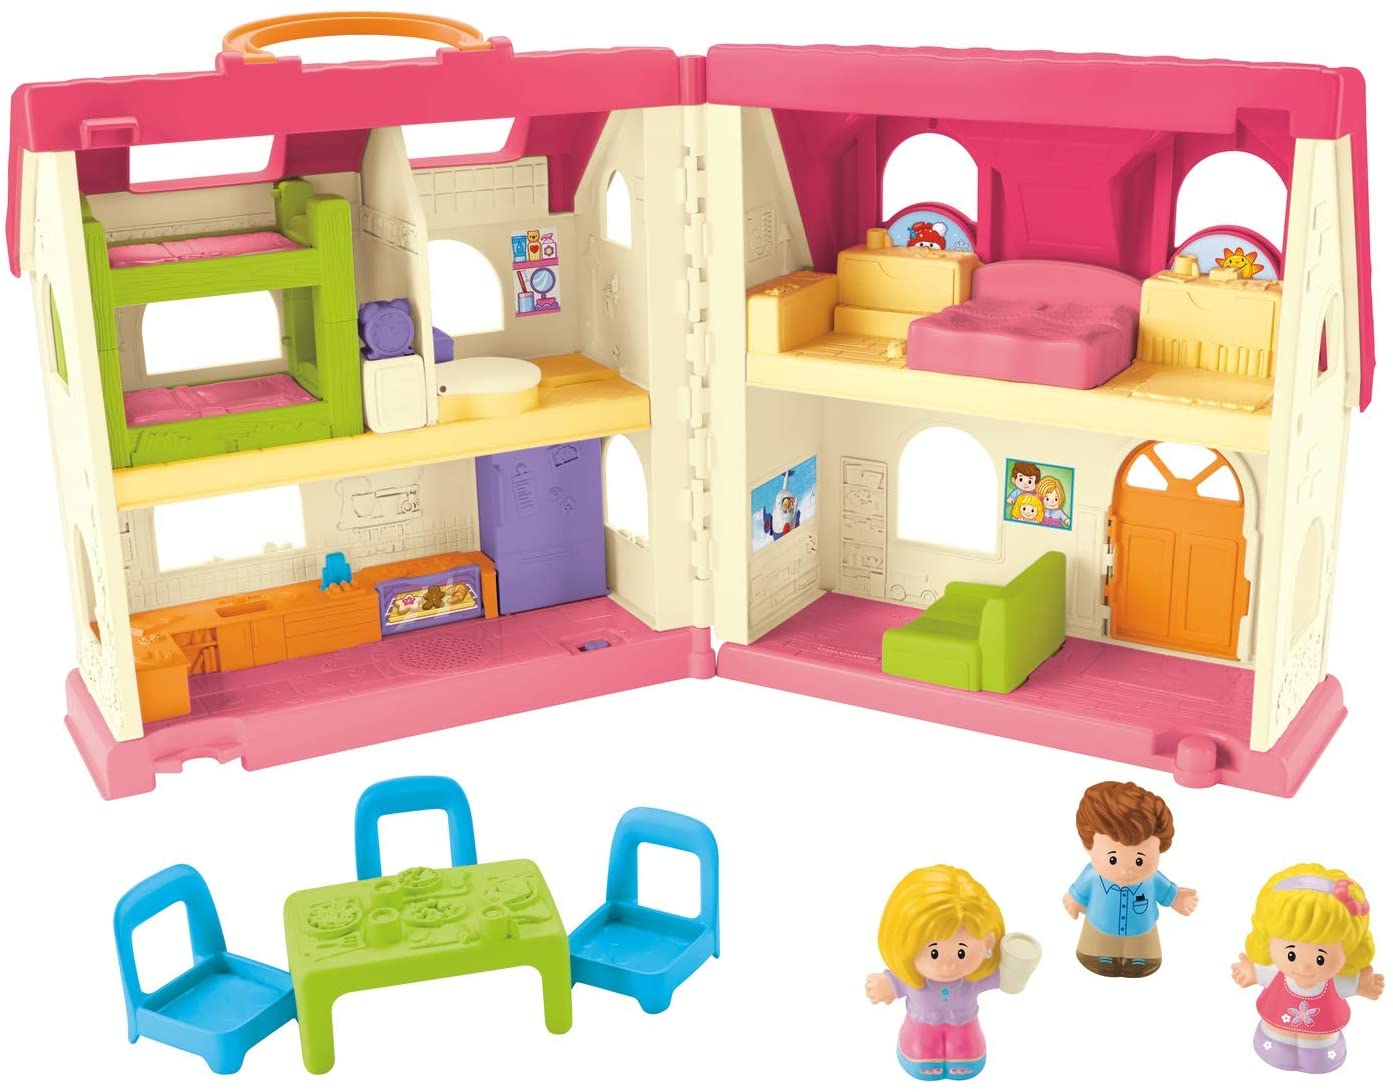 9 Best Fisher Price Little People Toys 2022 - Buying Guide 6